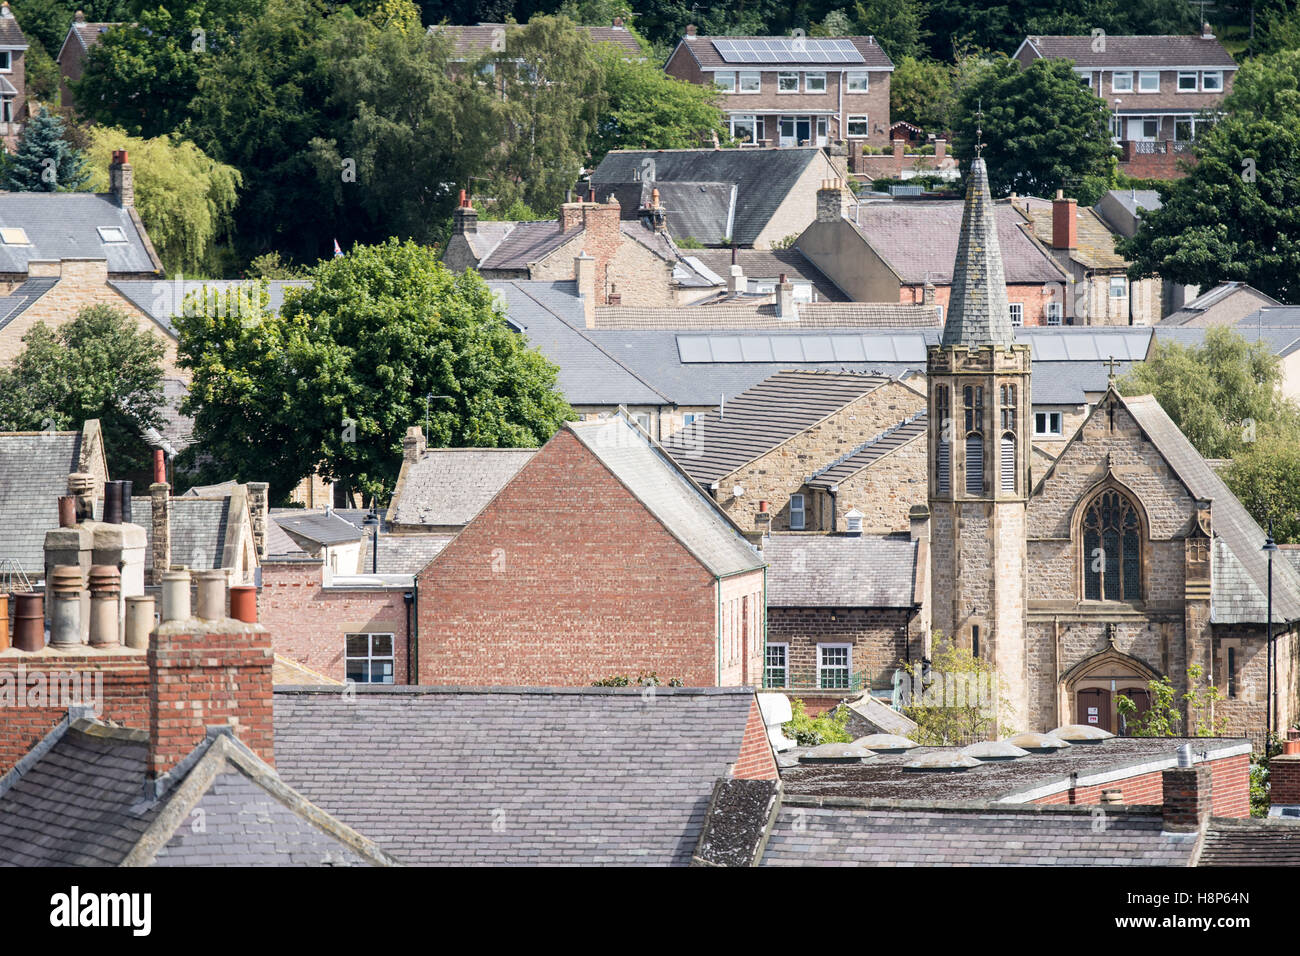 UK, England, Yorkshire, Richmond - Traditional architecture in the city of Richmond located in Northern Yorkshire. Stock Photo